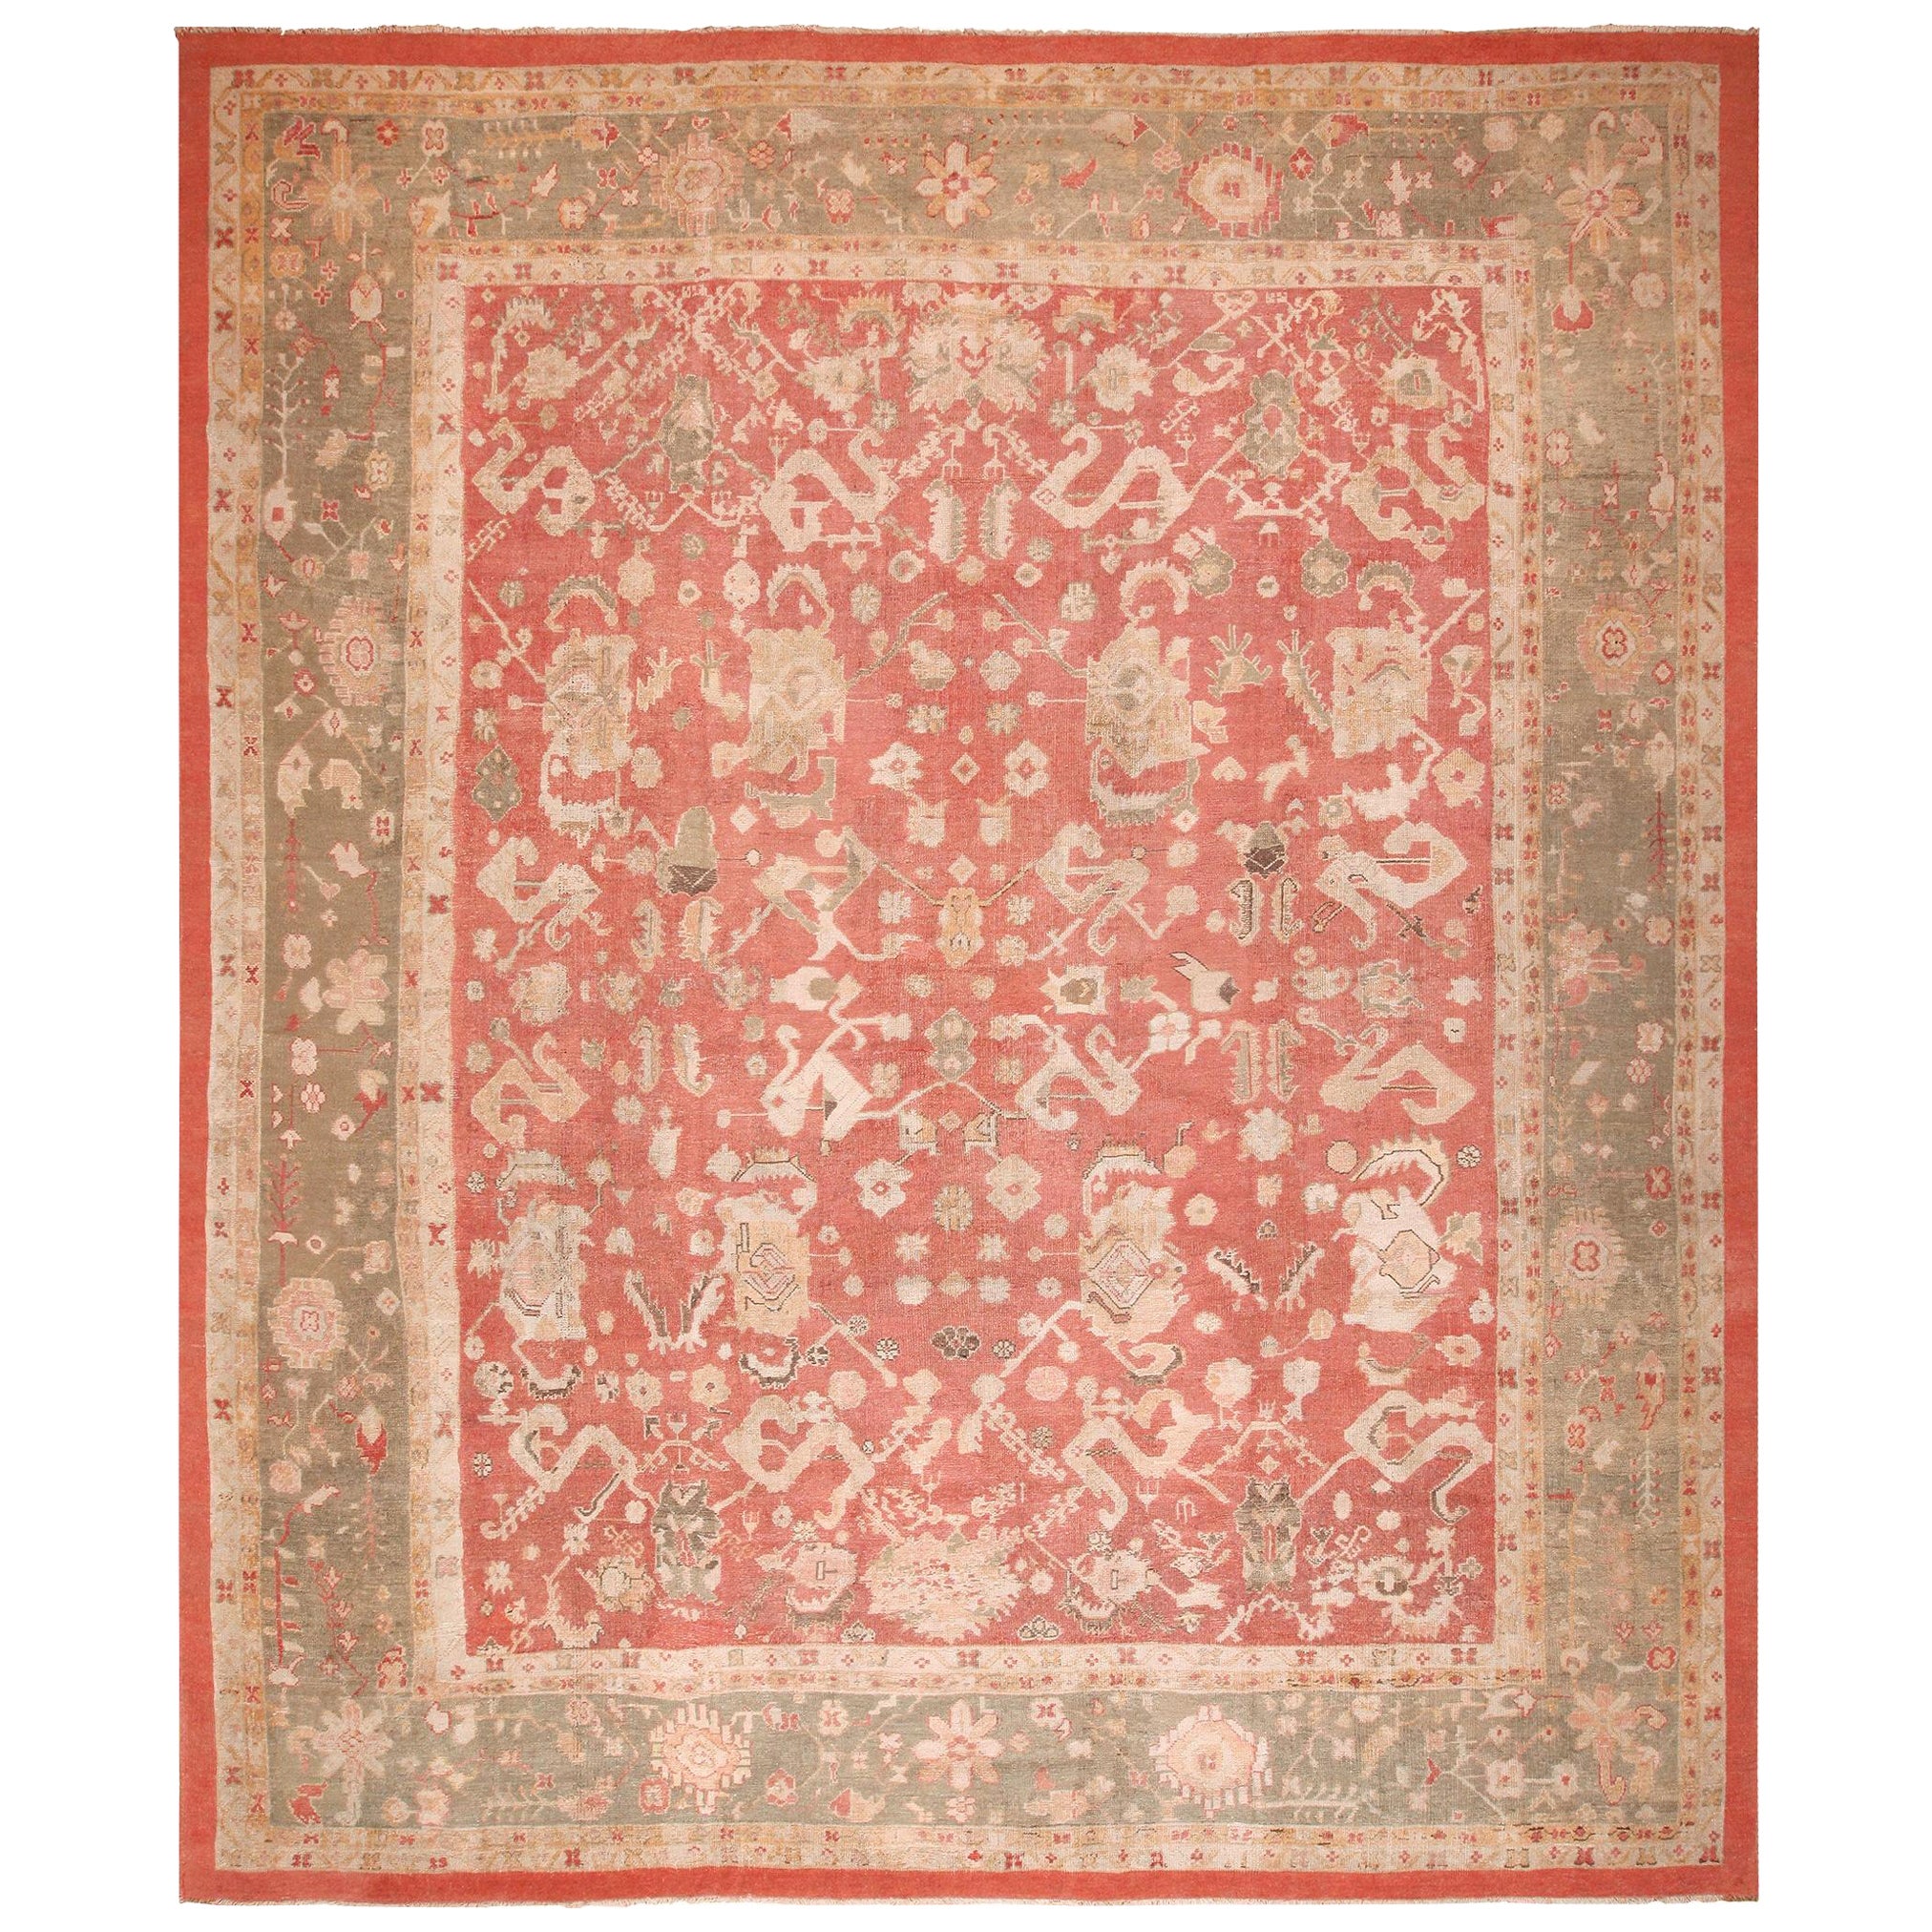 What is a Turkish Oushak rug?